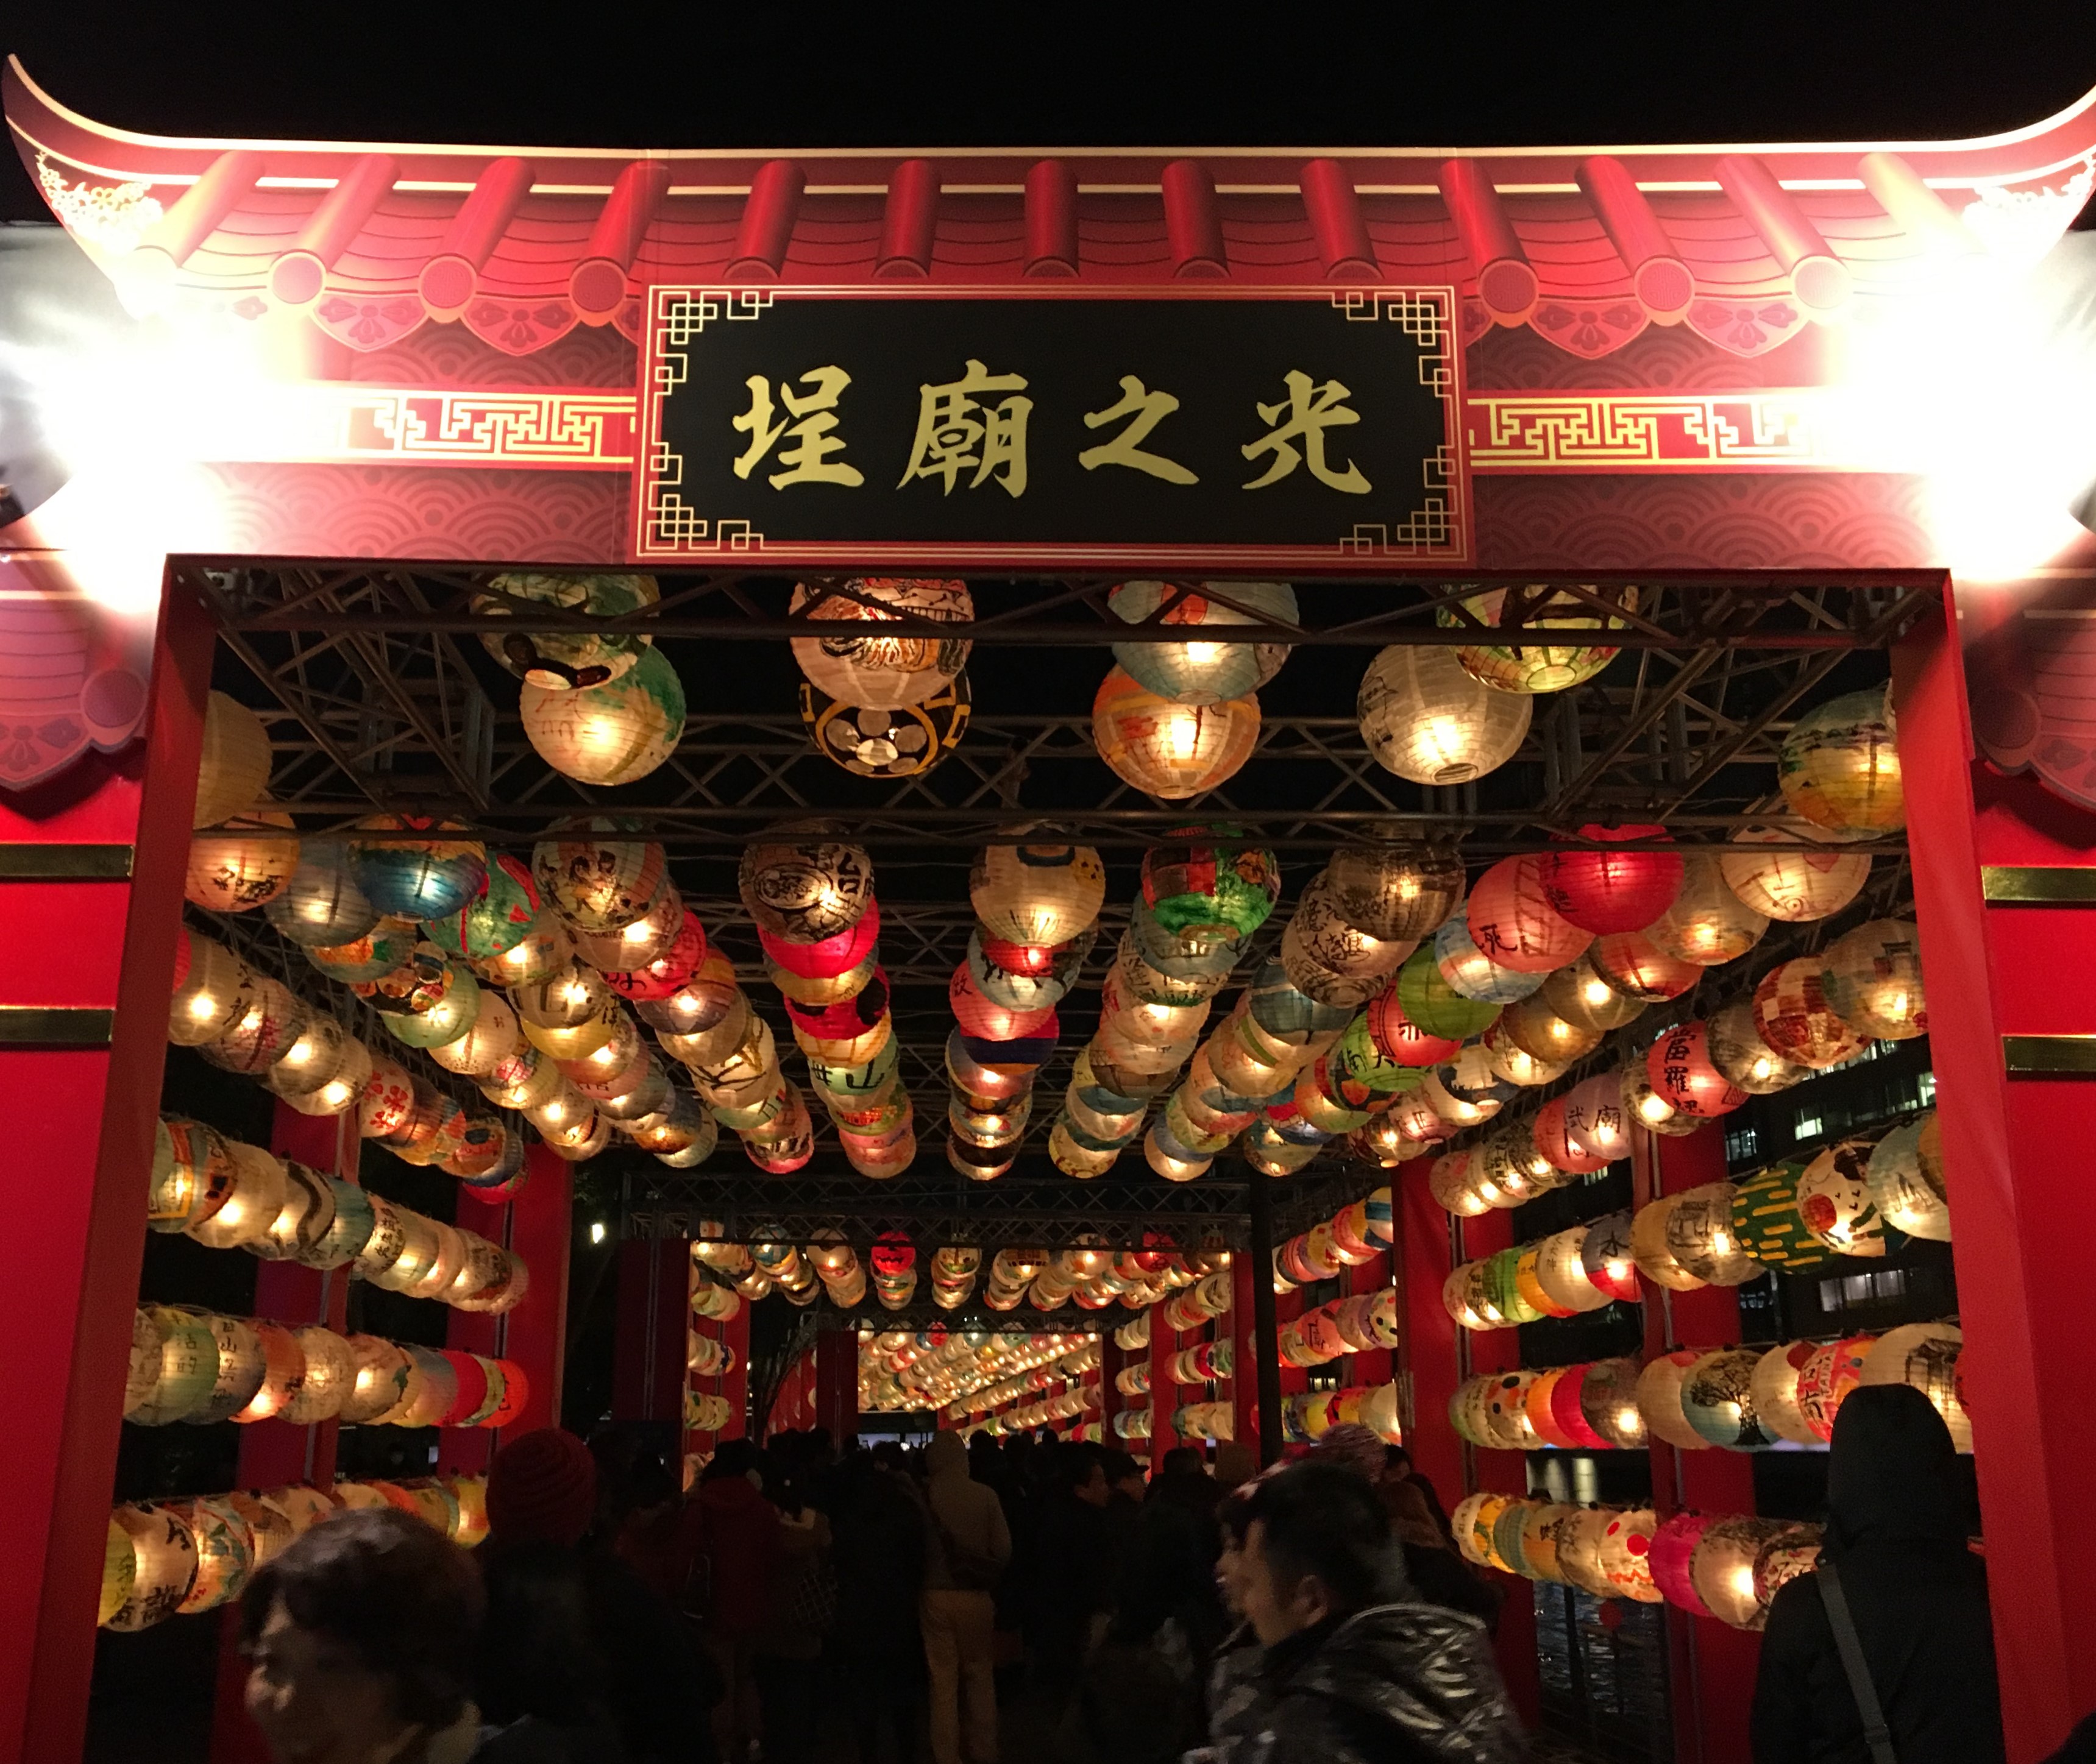 Taiwanese style cardboard entrance filled with glowing lanterns